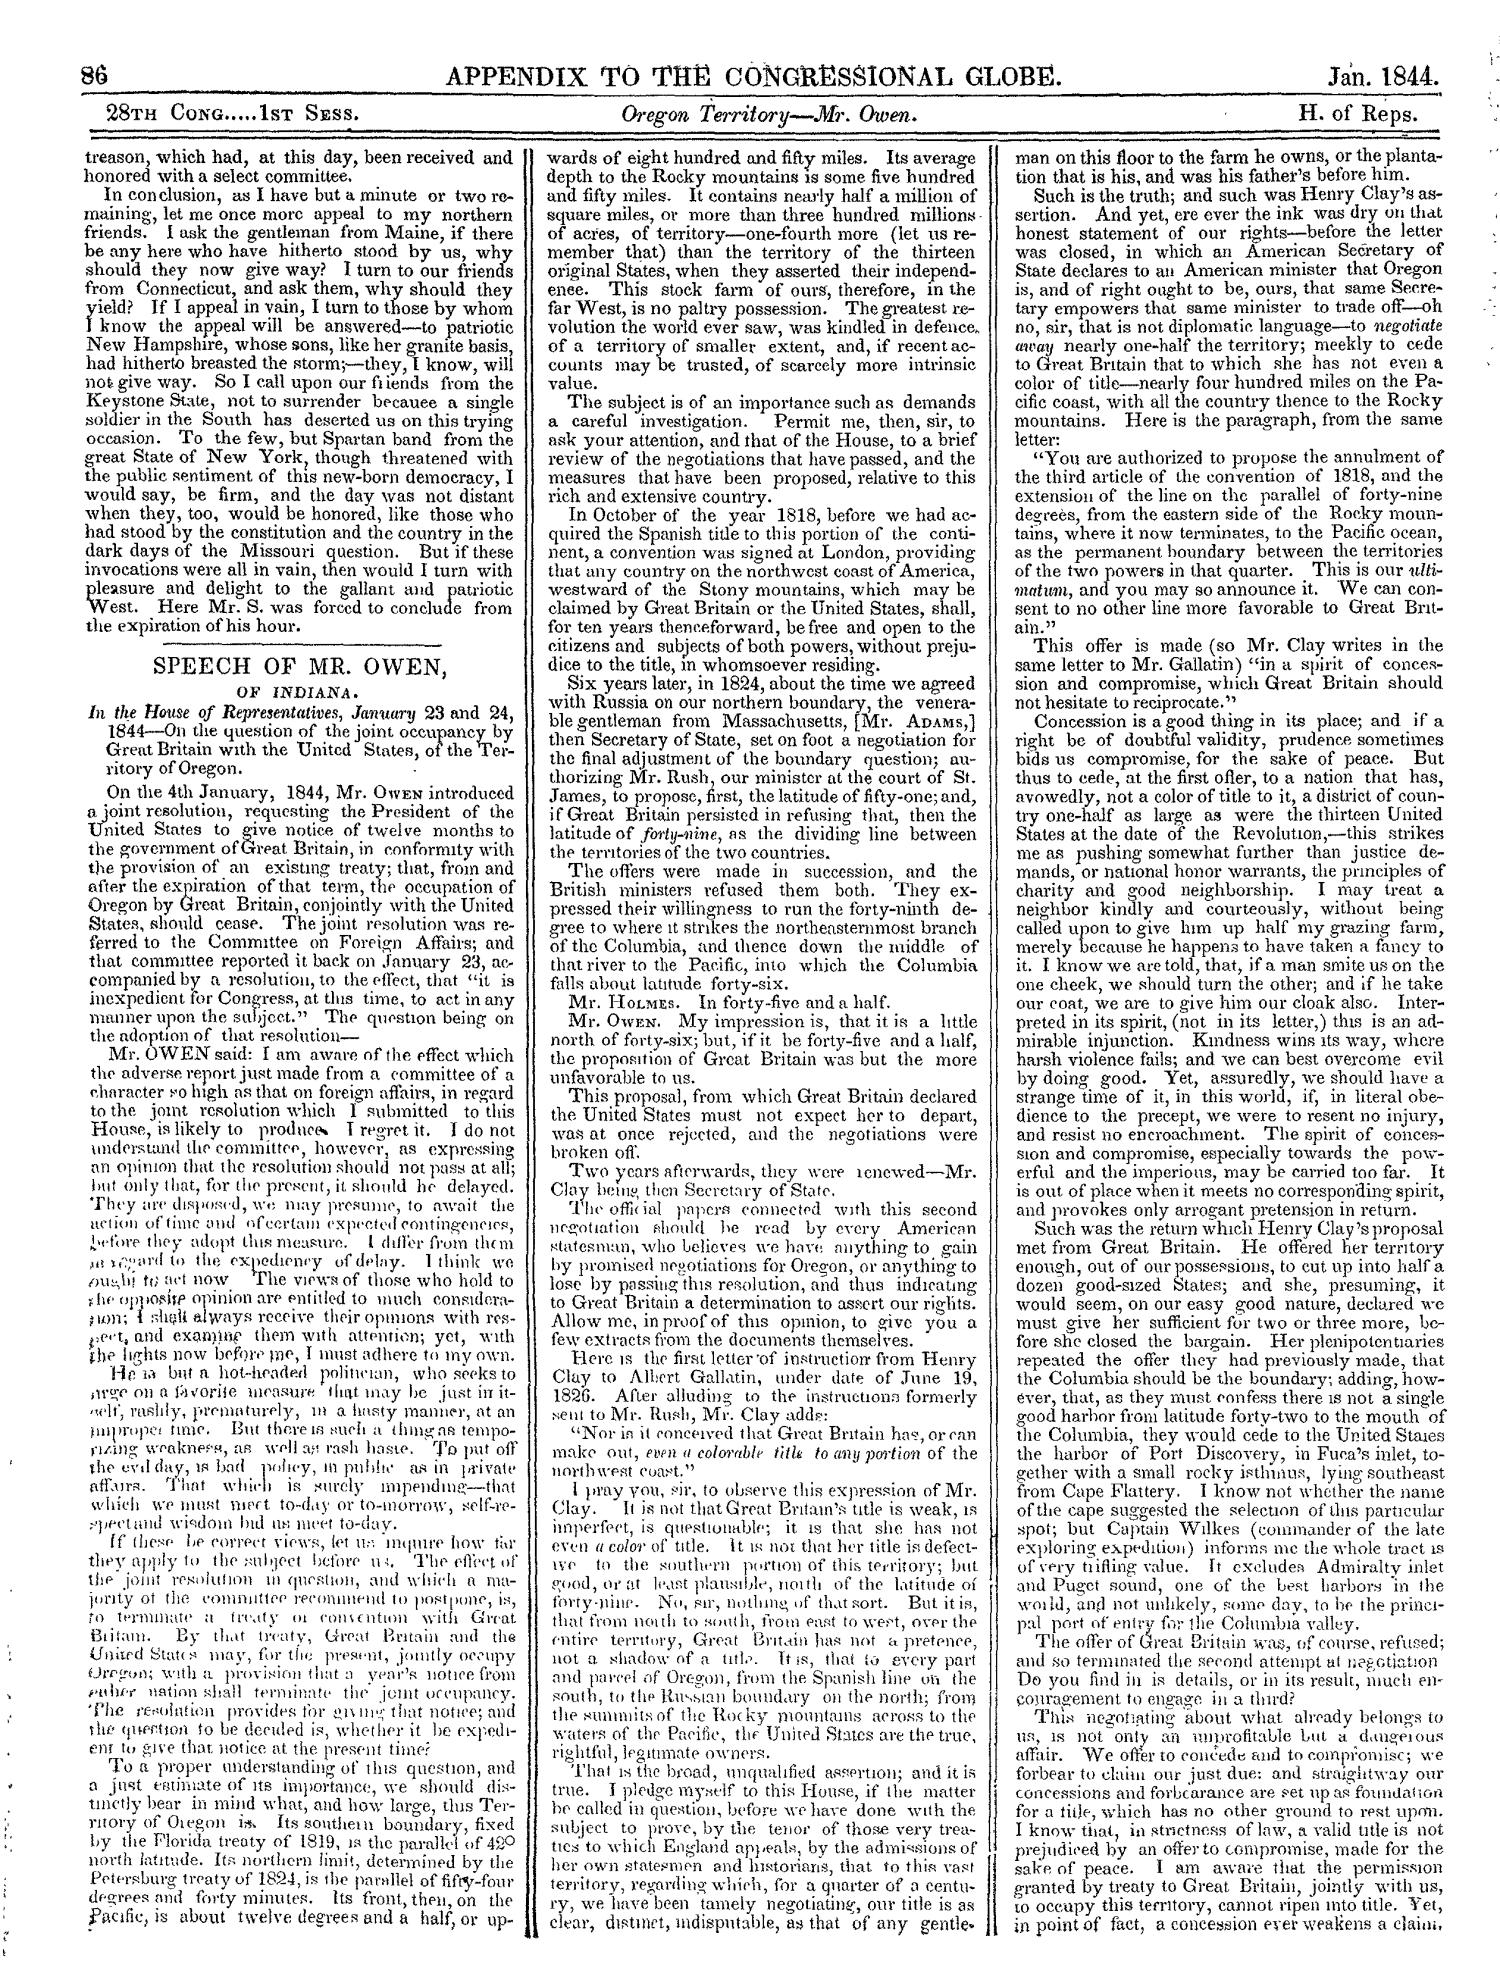 The Congressional Globe, Volume 13, Part 2: Twenty-Eighth Congress, First Session
                                                
                                                    86
                                                